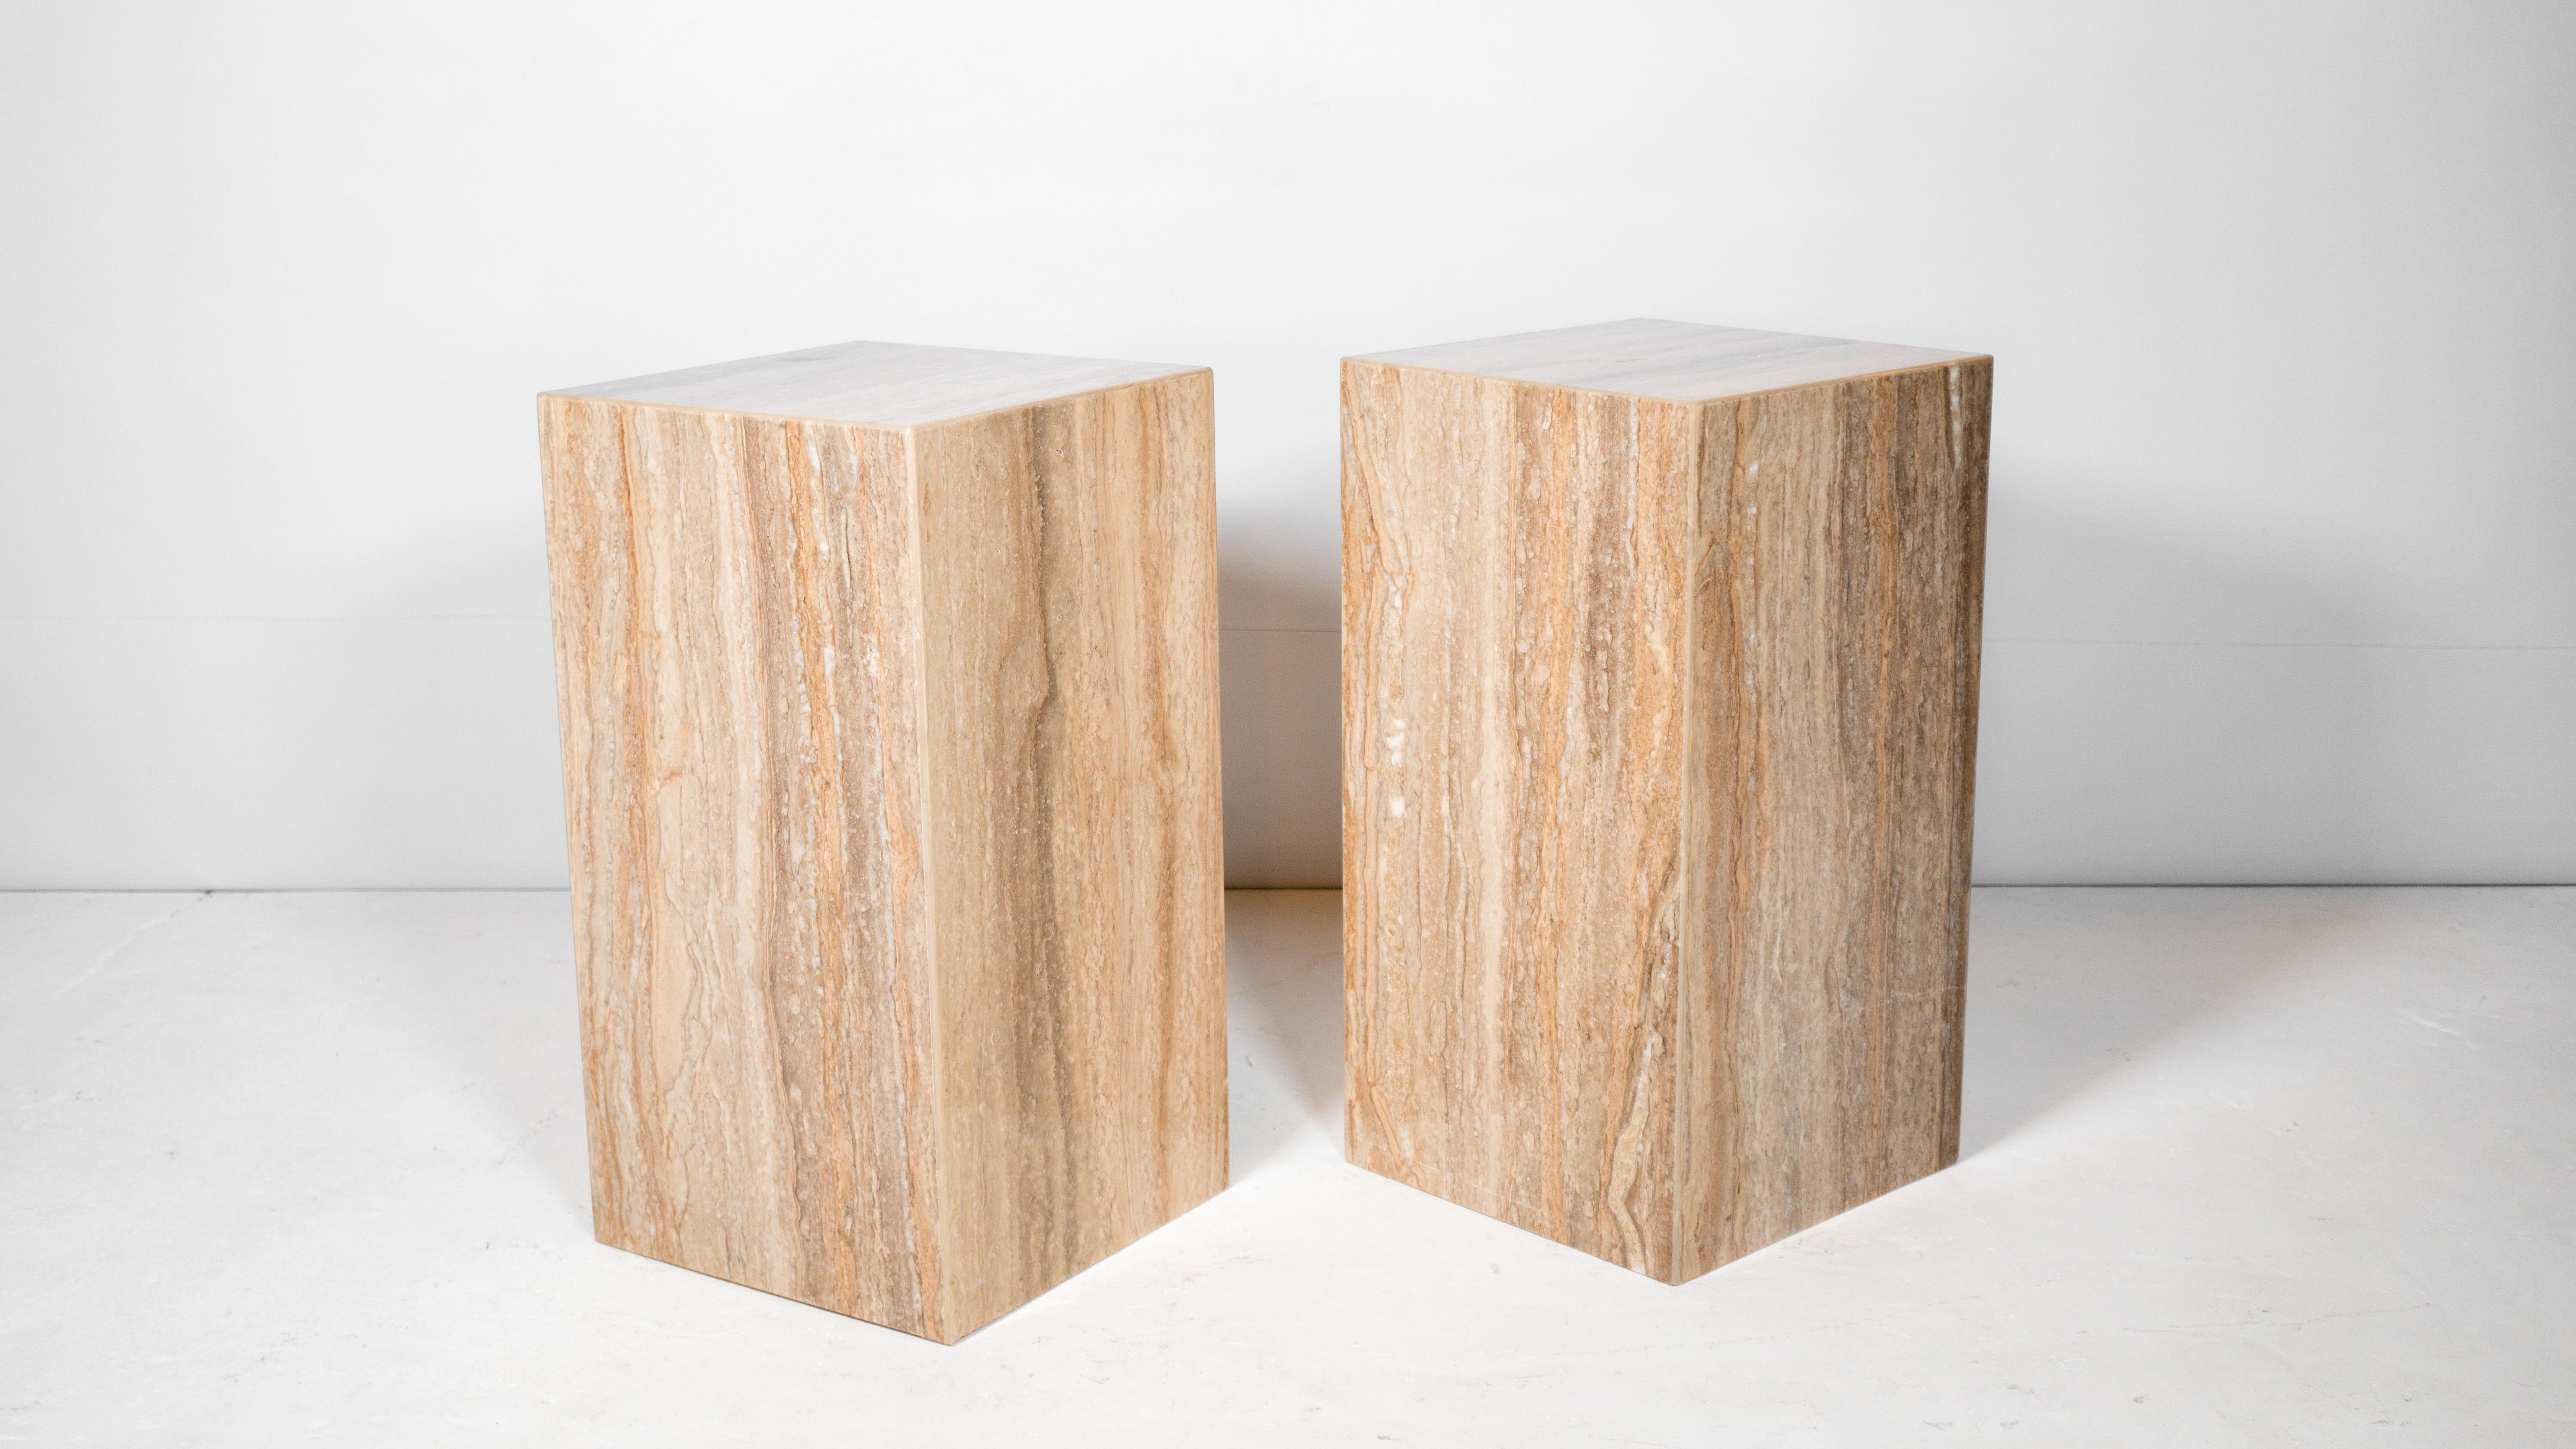 1980s Italian Polished Travertine Tower Cube Side Tables - a Pair For Sale 2